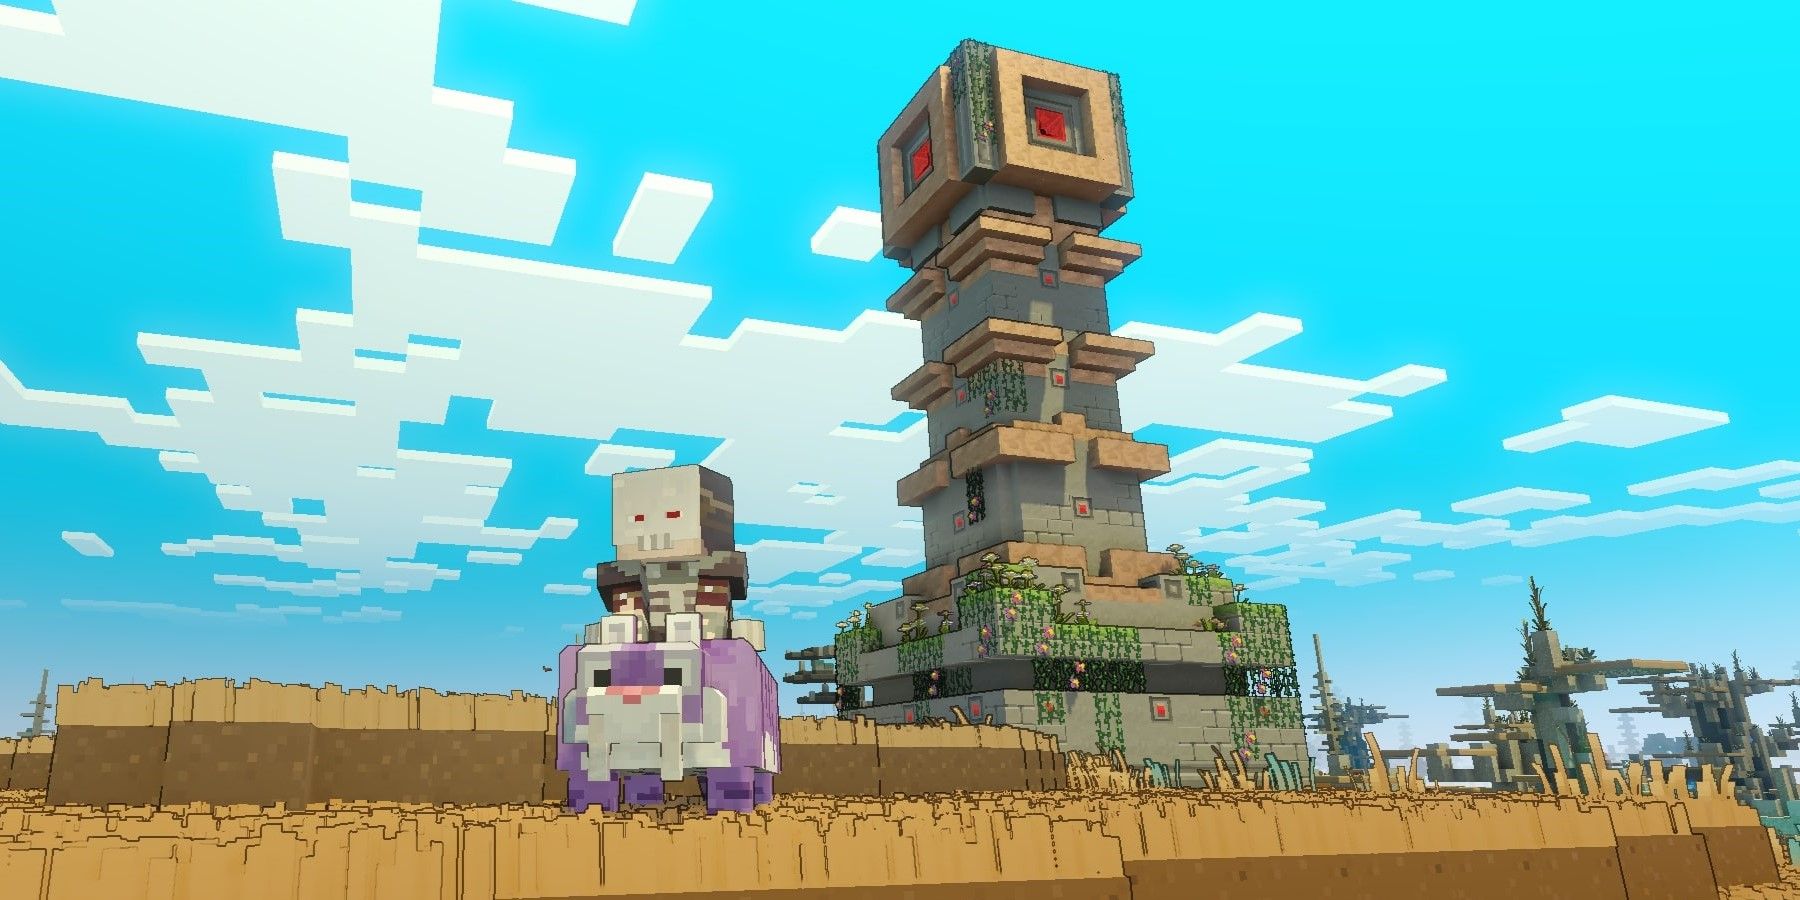 Minecraft Legends Blast Tower, with a skeleton on a mount in the foreground